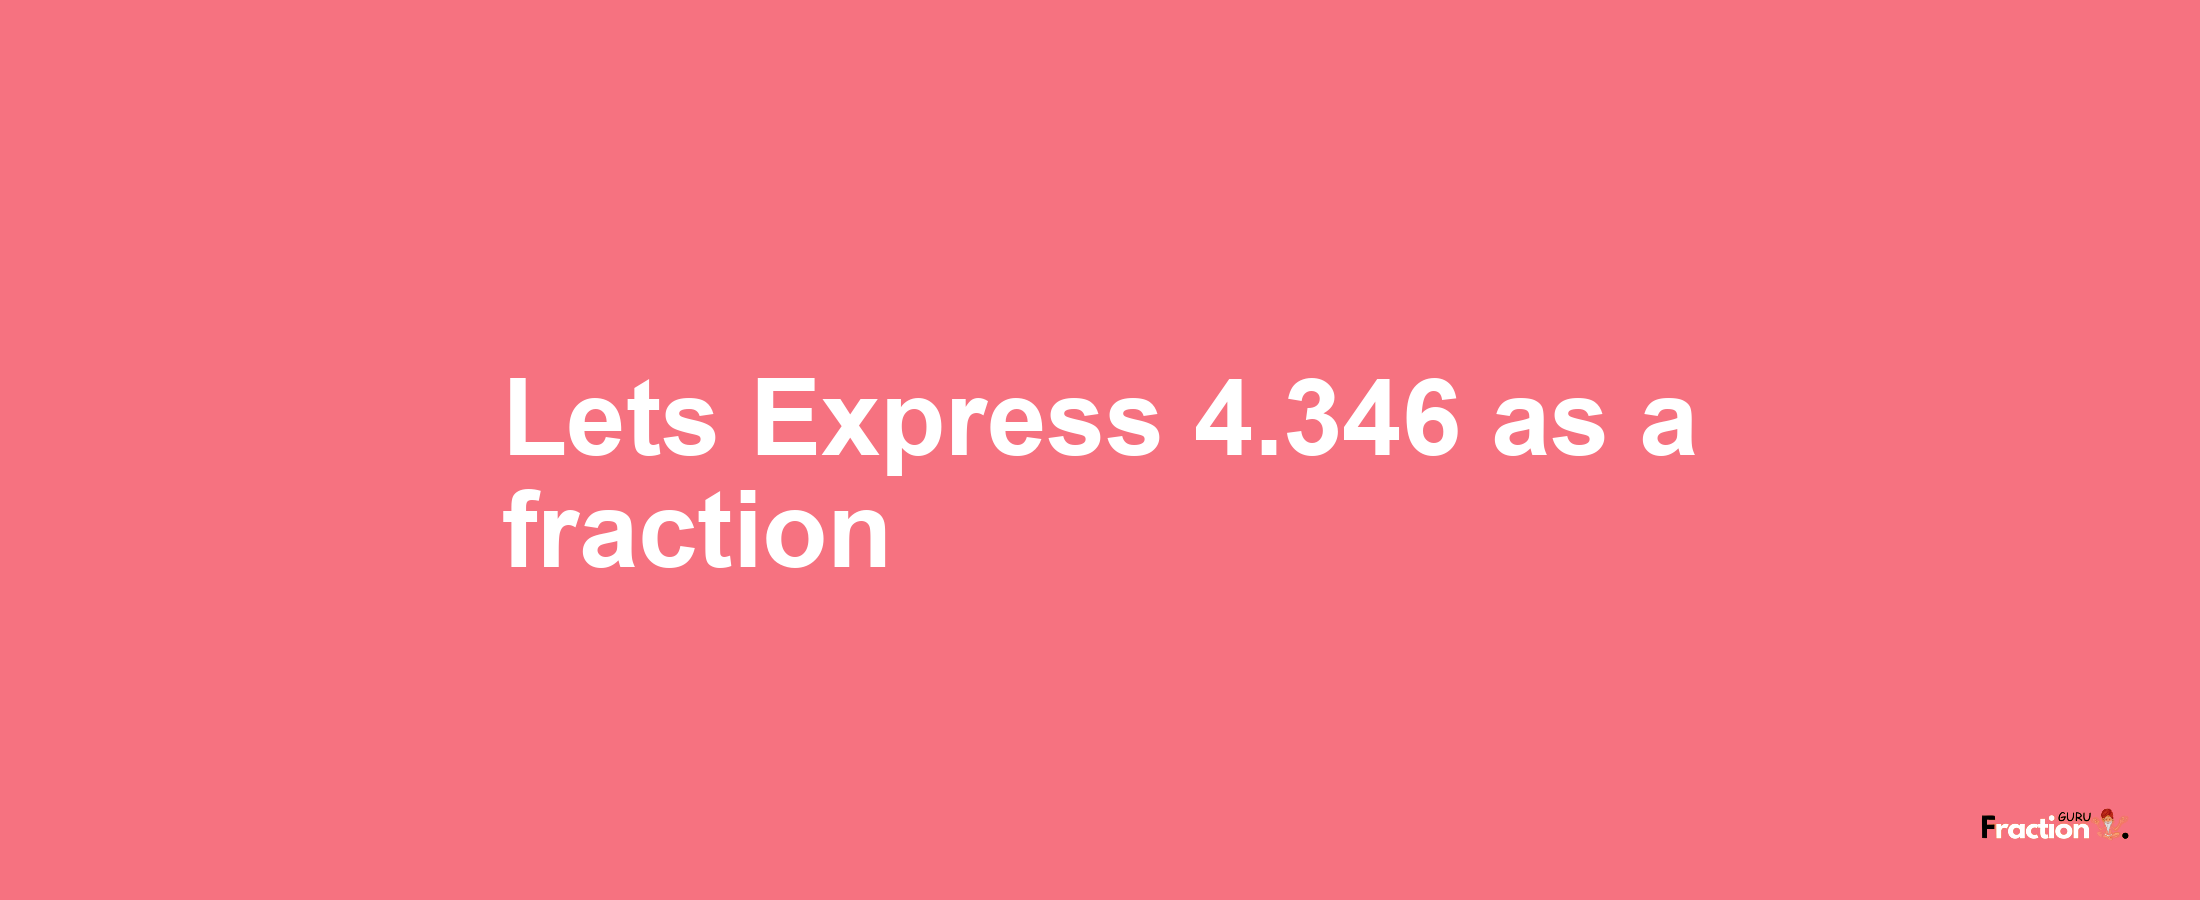 Lets Express 4.346 as afraction